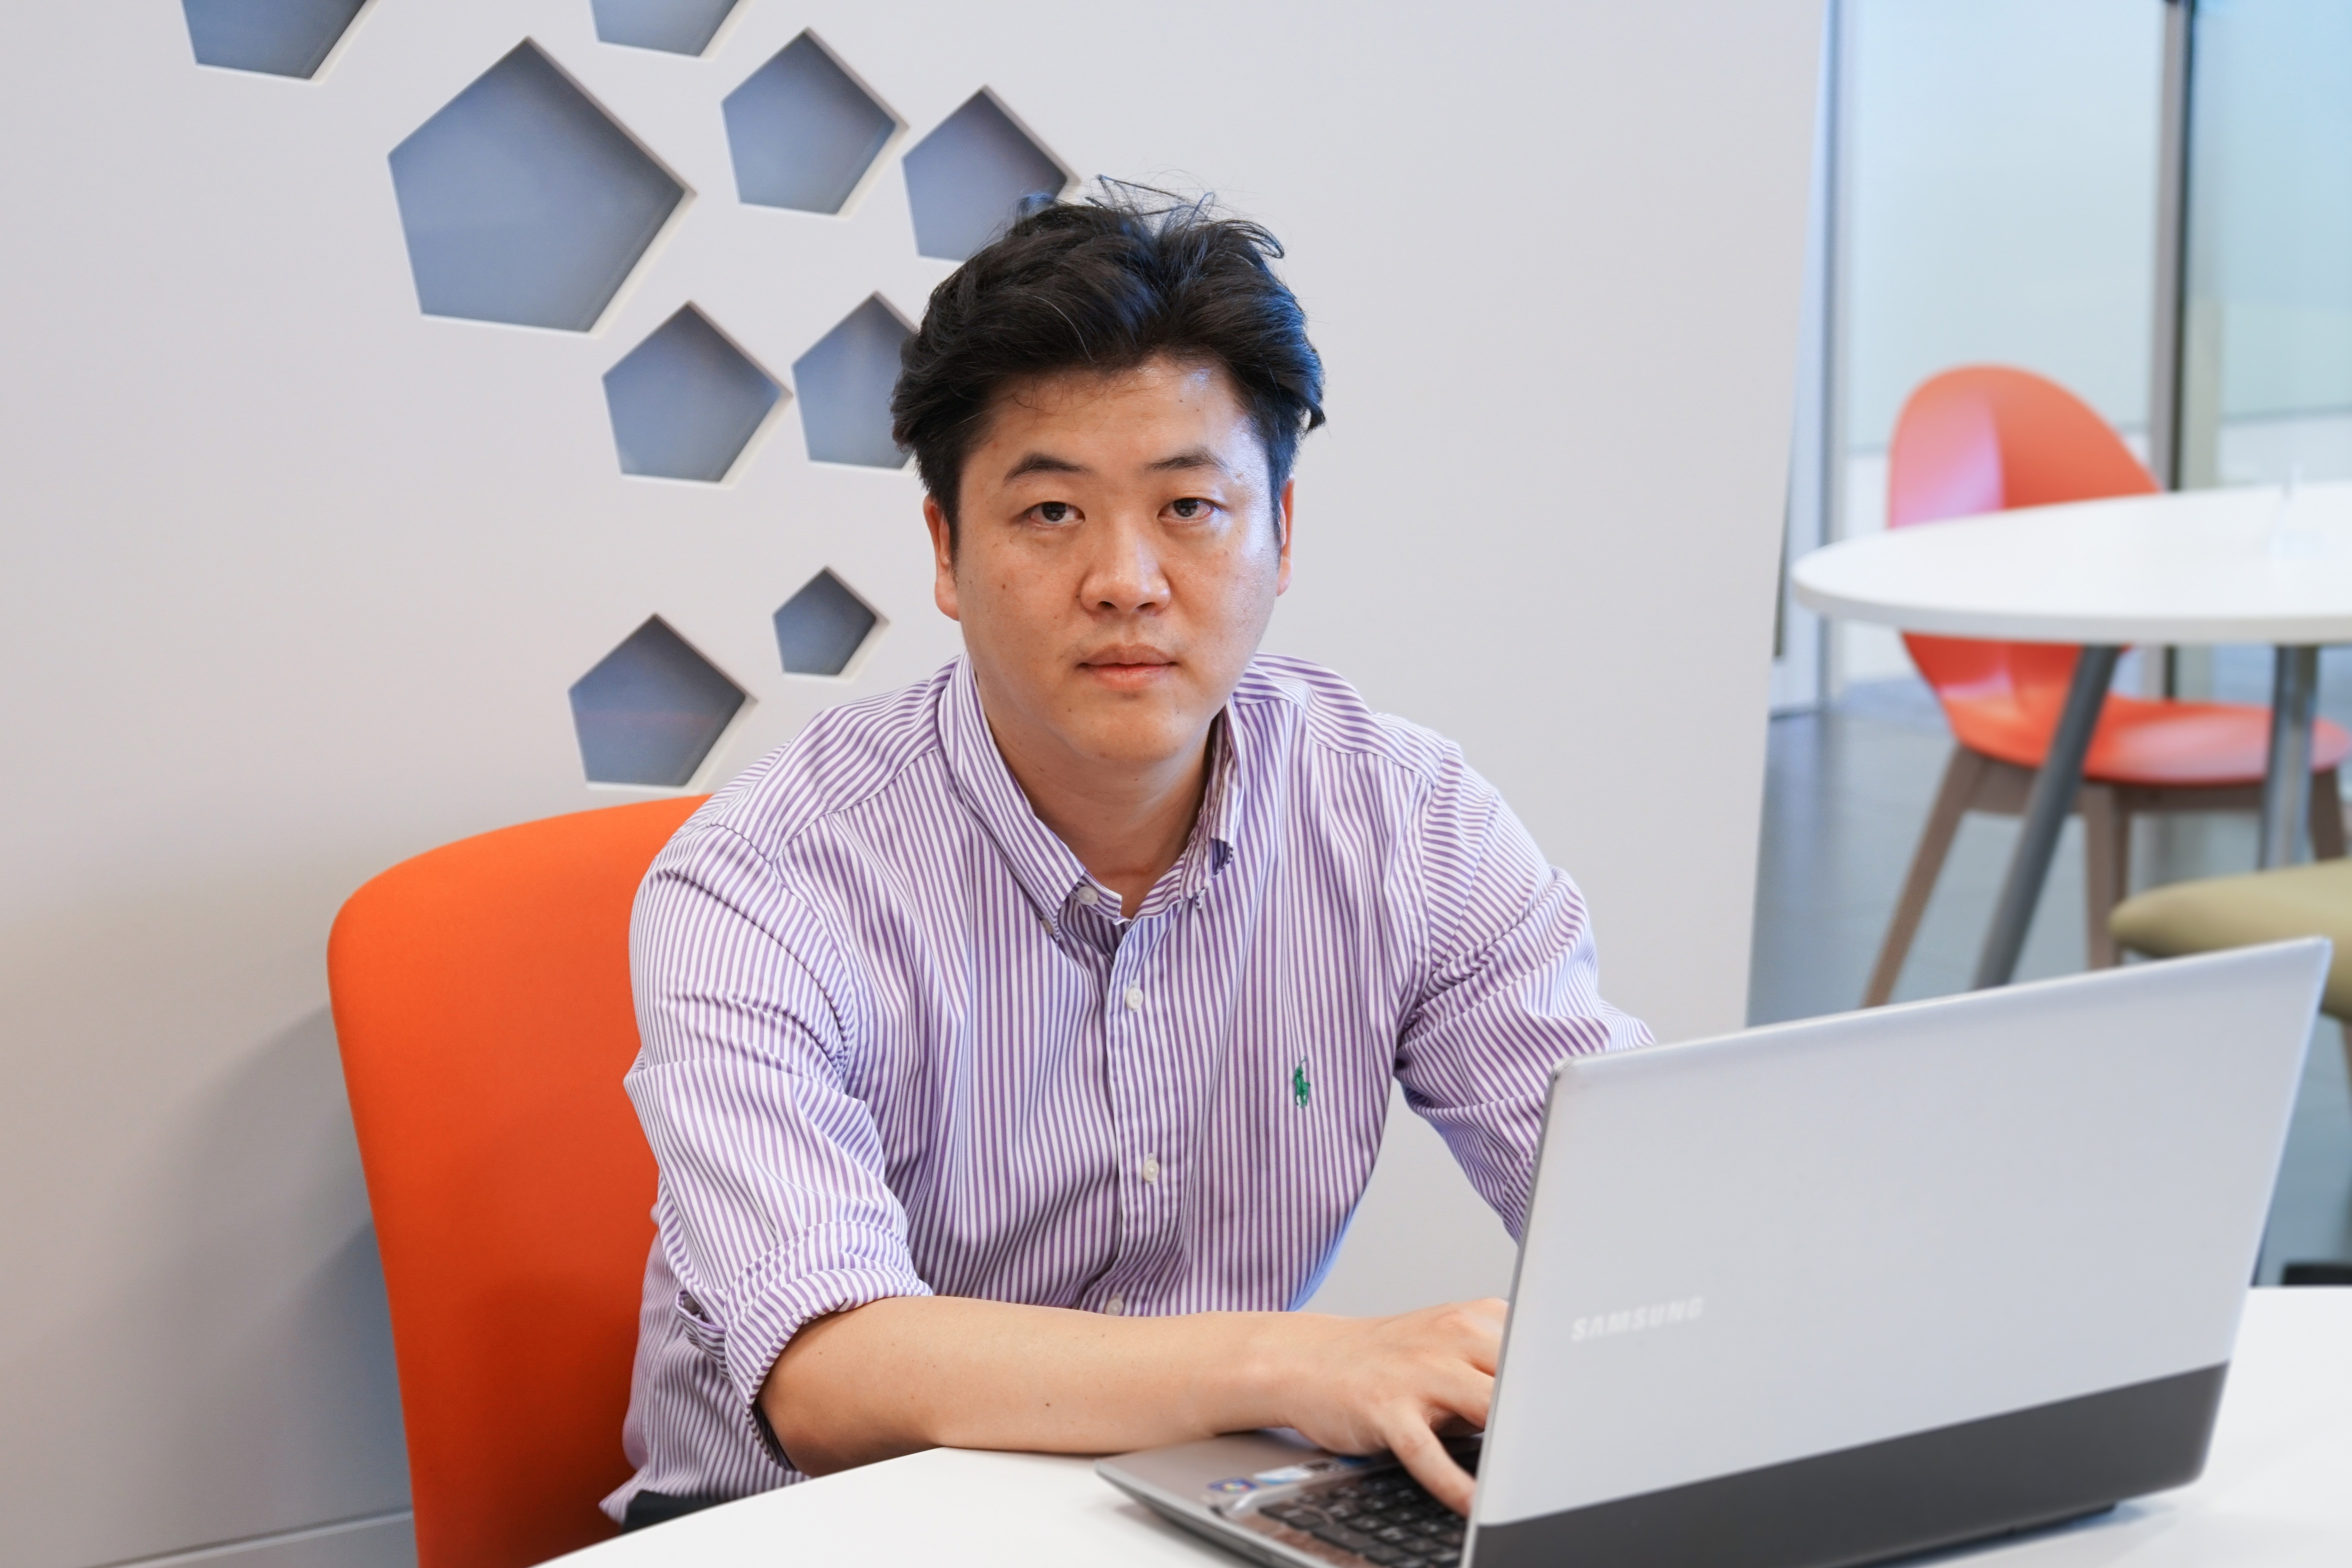 Woori Bank employee Kwang Beom Chung is currently enrolled in RMIT Vietnam’s MBA program, and may stay in Vietnam to work at the bank once his program ends. 